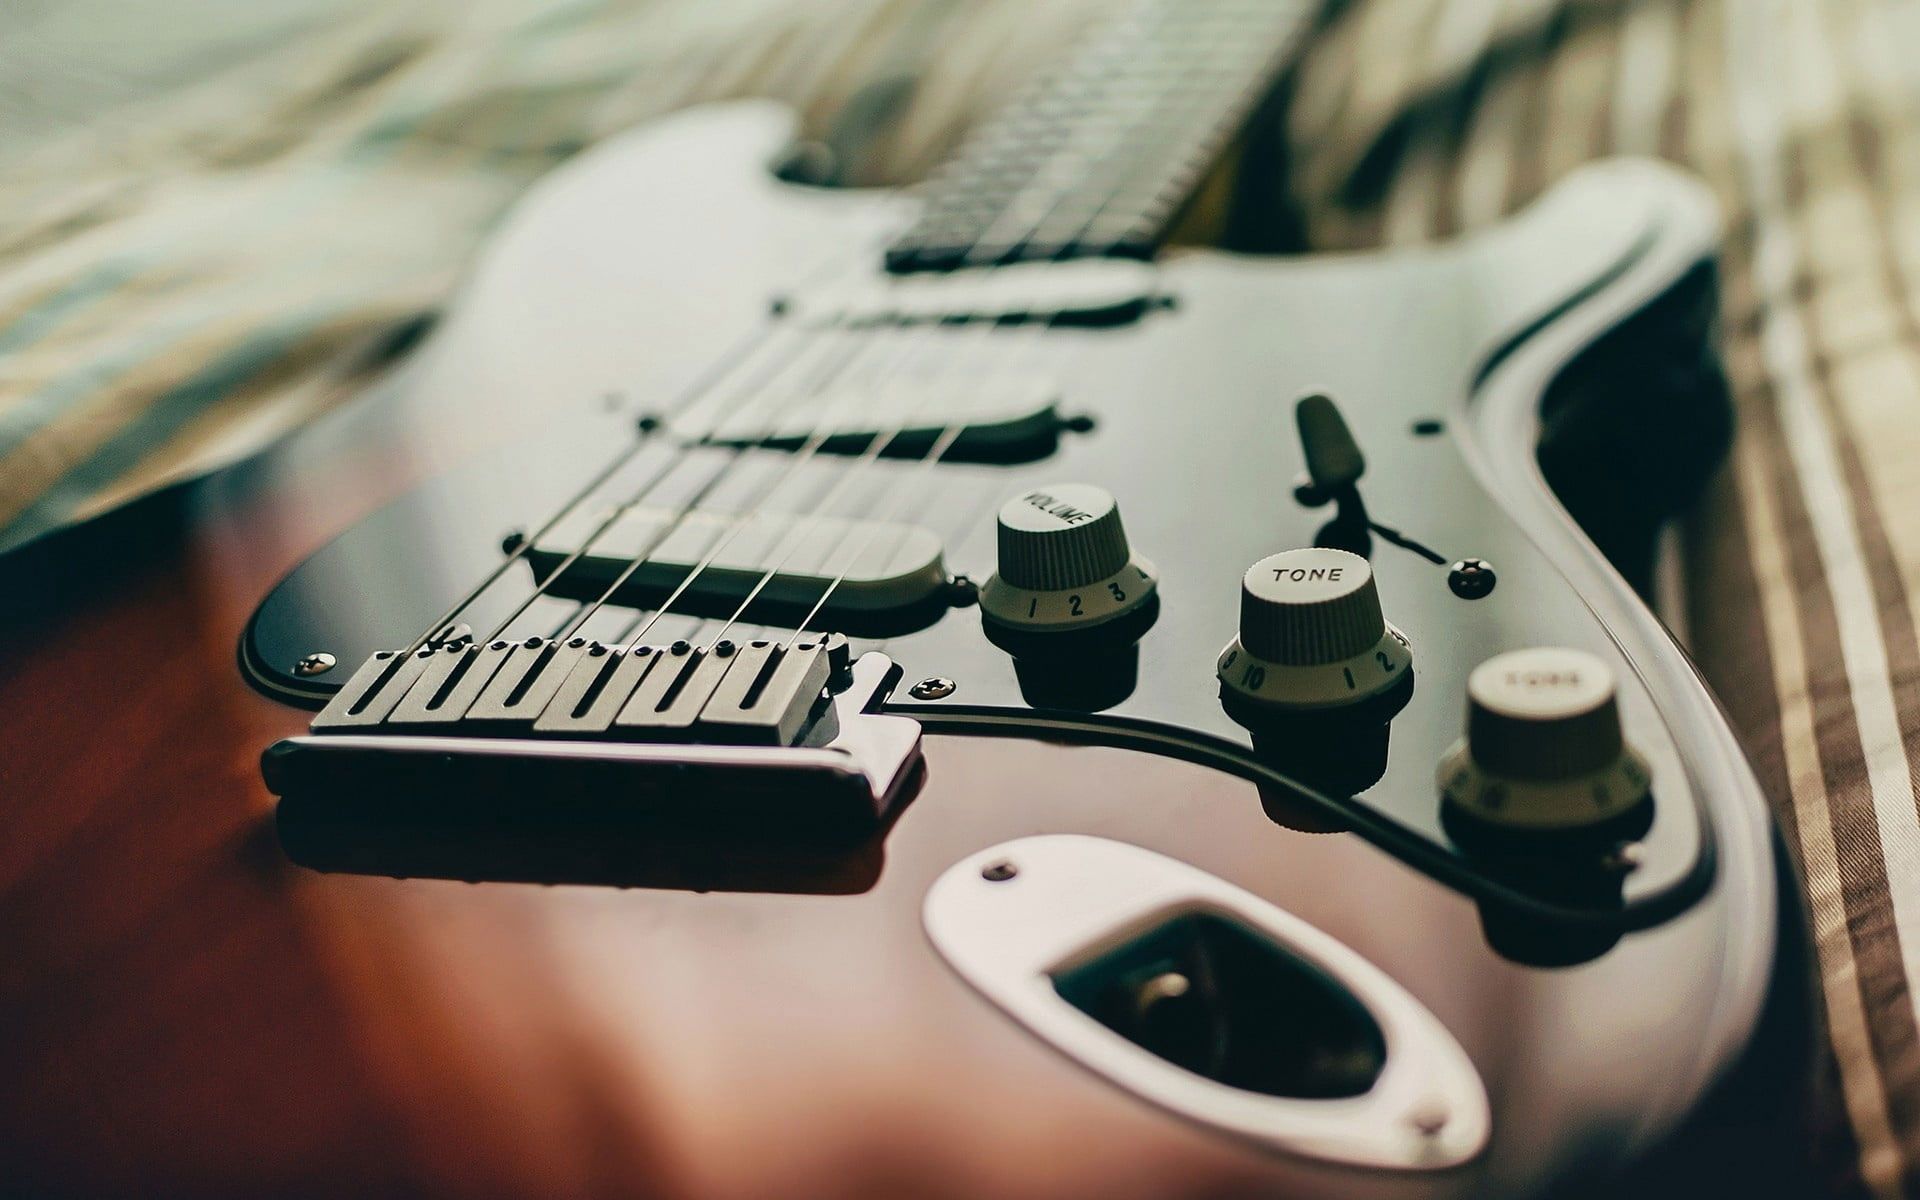 A close up of a guitar with many knobs and buttons. - Guitar